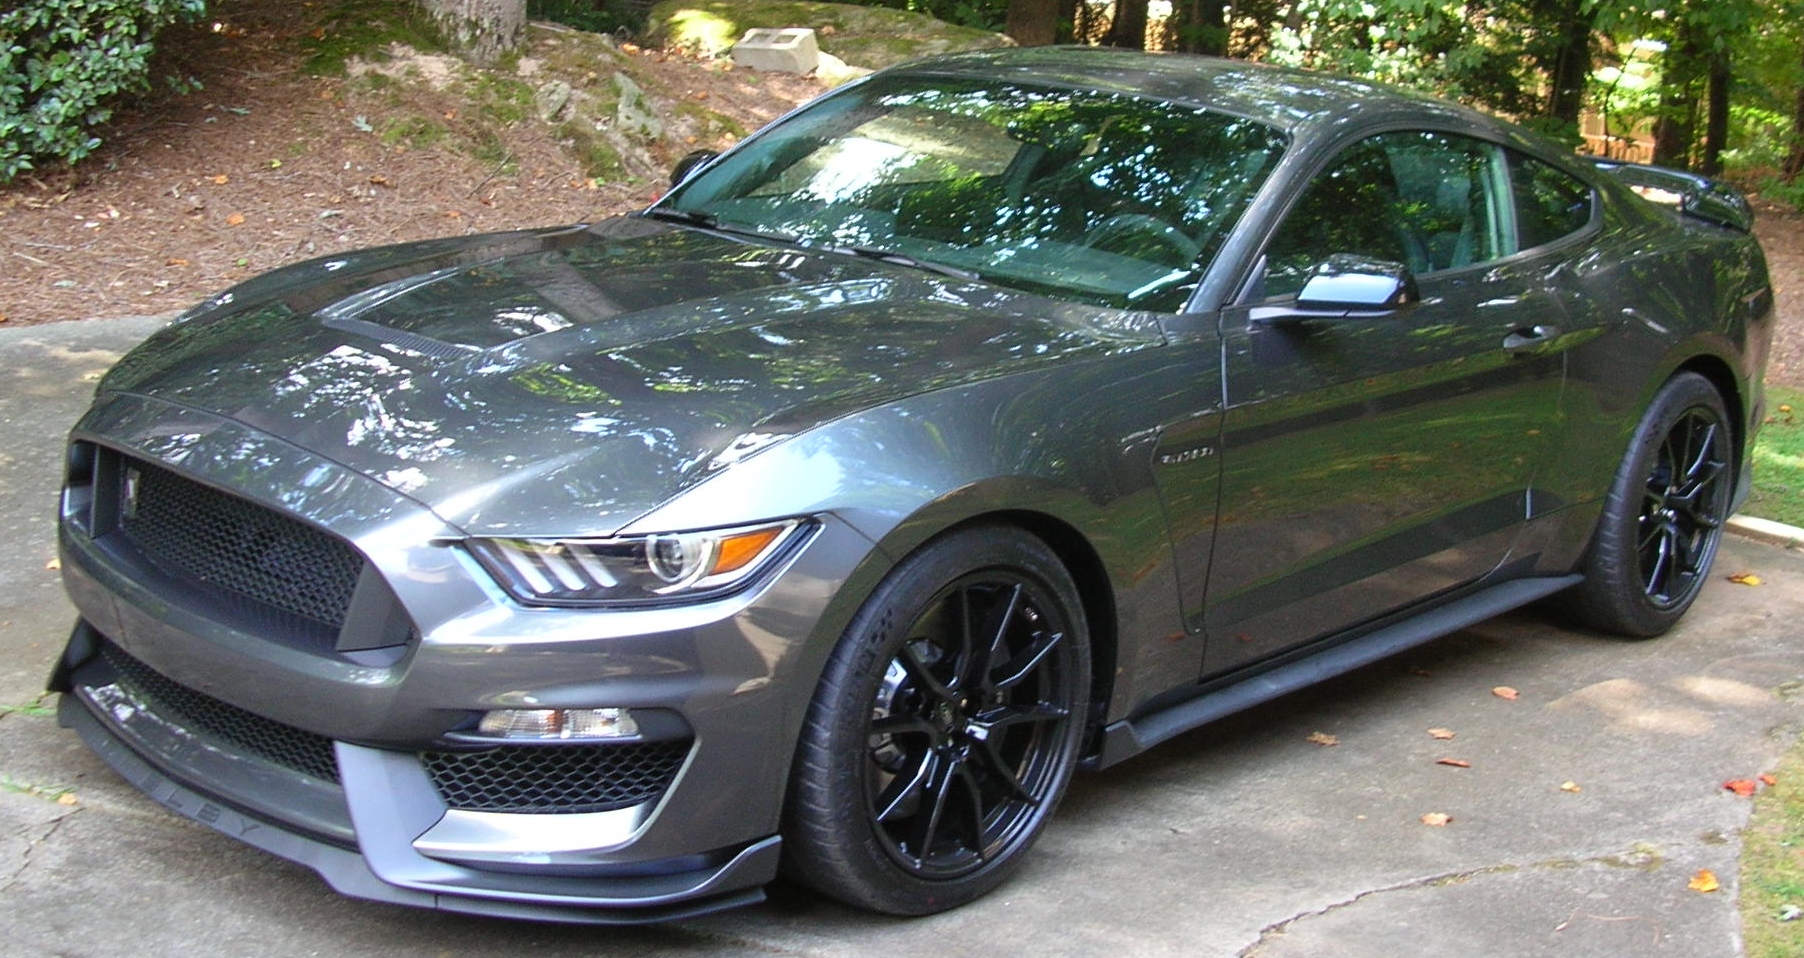 2019 Mustang
GT350 HPDE/Track -  (2019 Shelby GT350)